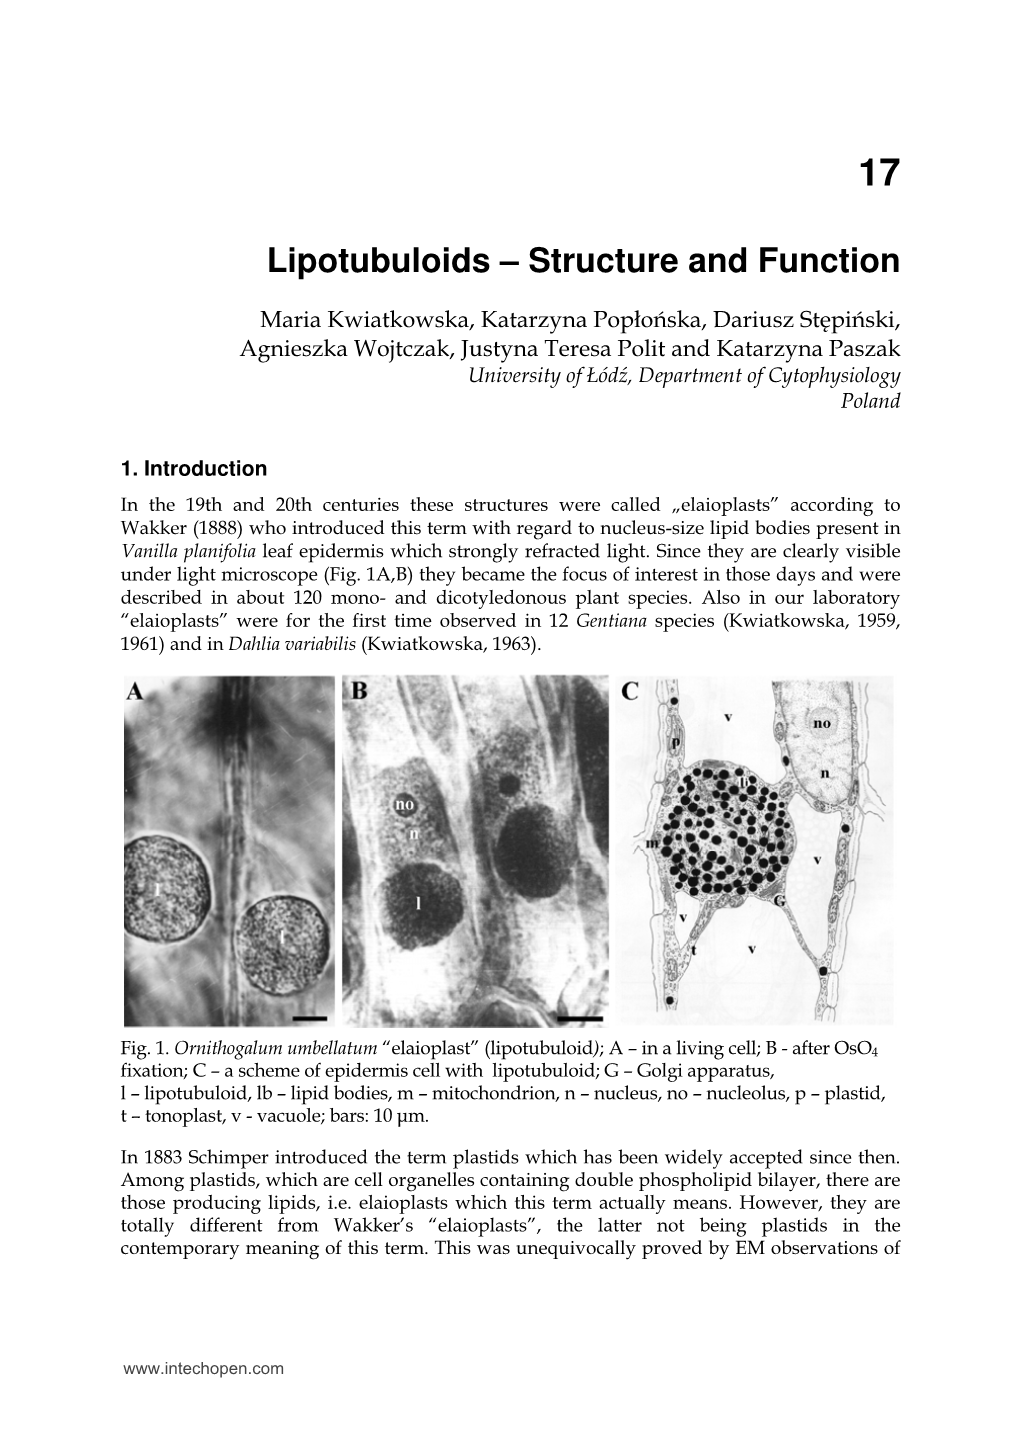 Lipotubuloids – Structure and Function